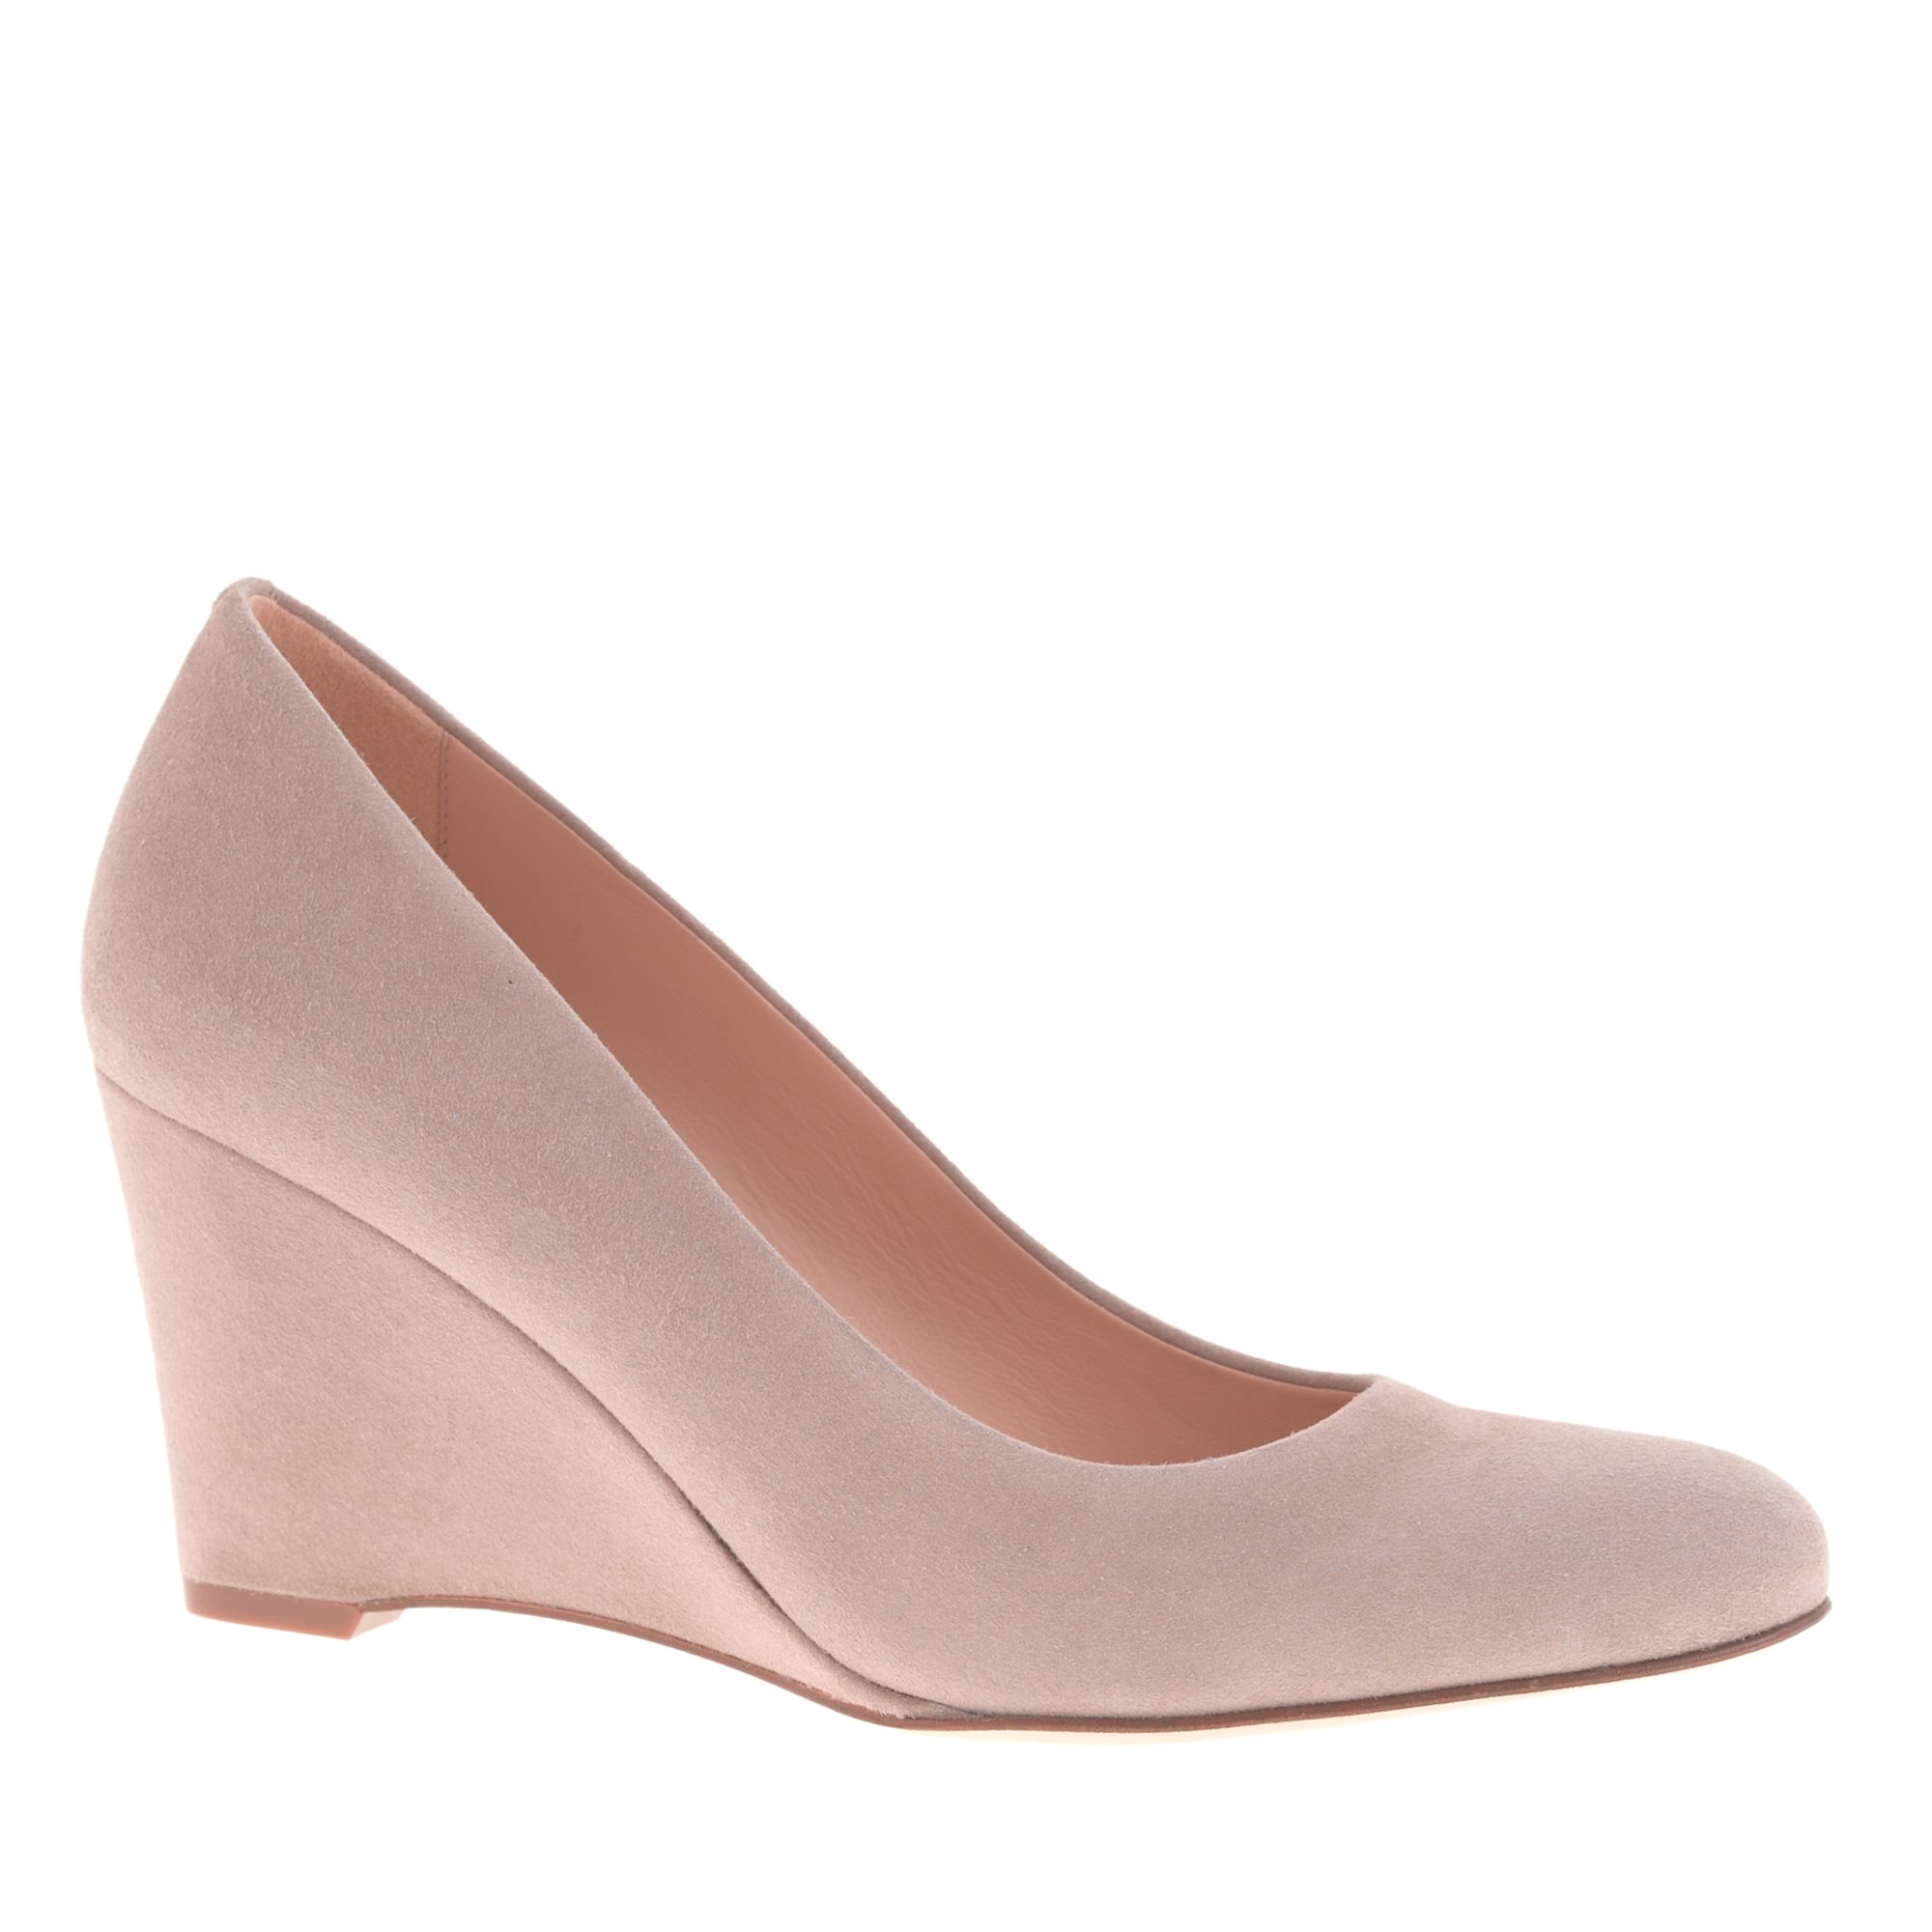 J.crew Martina Suede Wedges in Pink (pale thistle) | Lyst